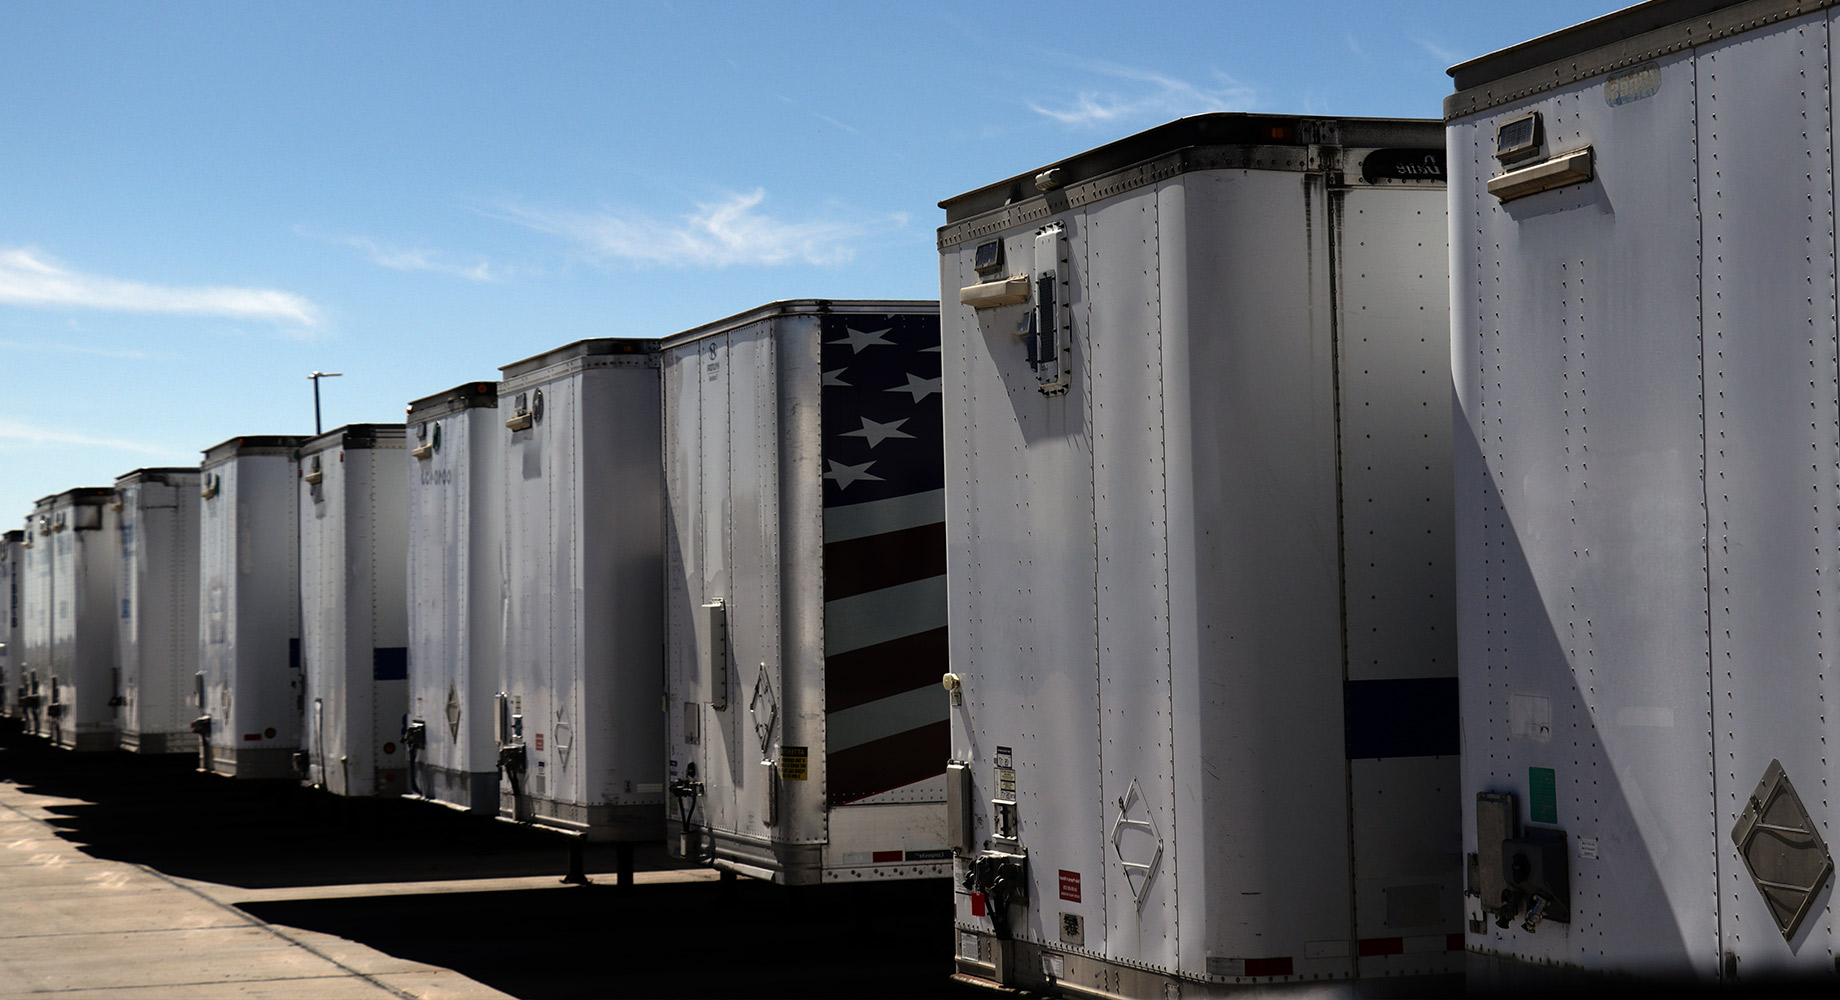 Trailers waiting to be loaded